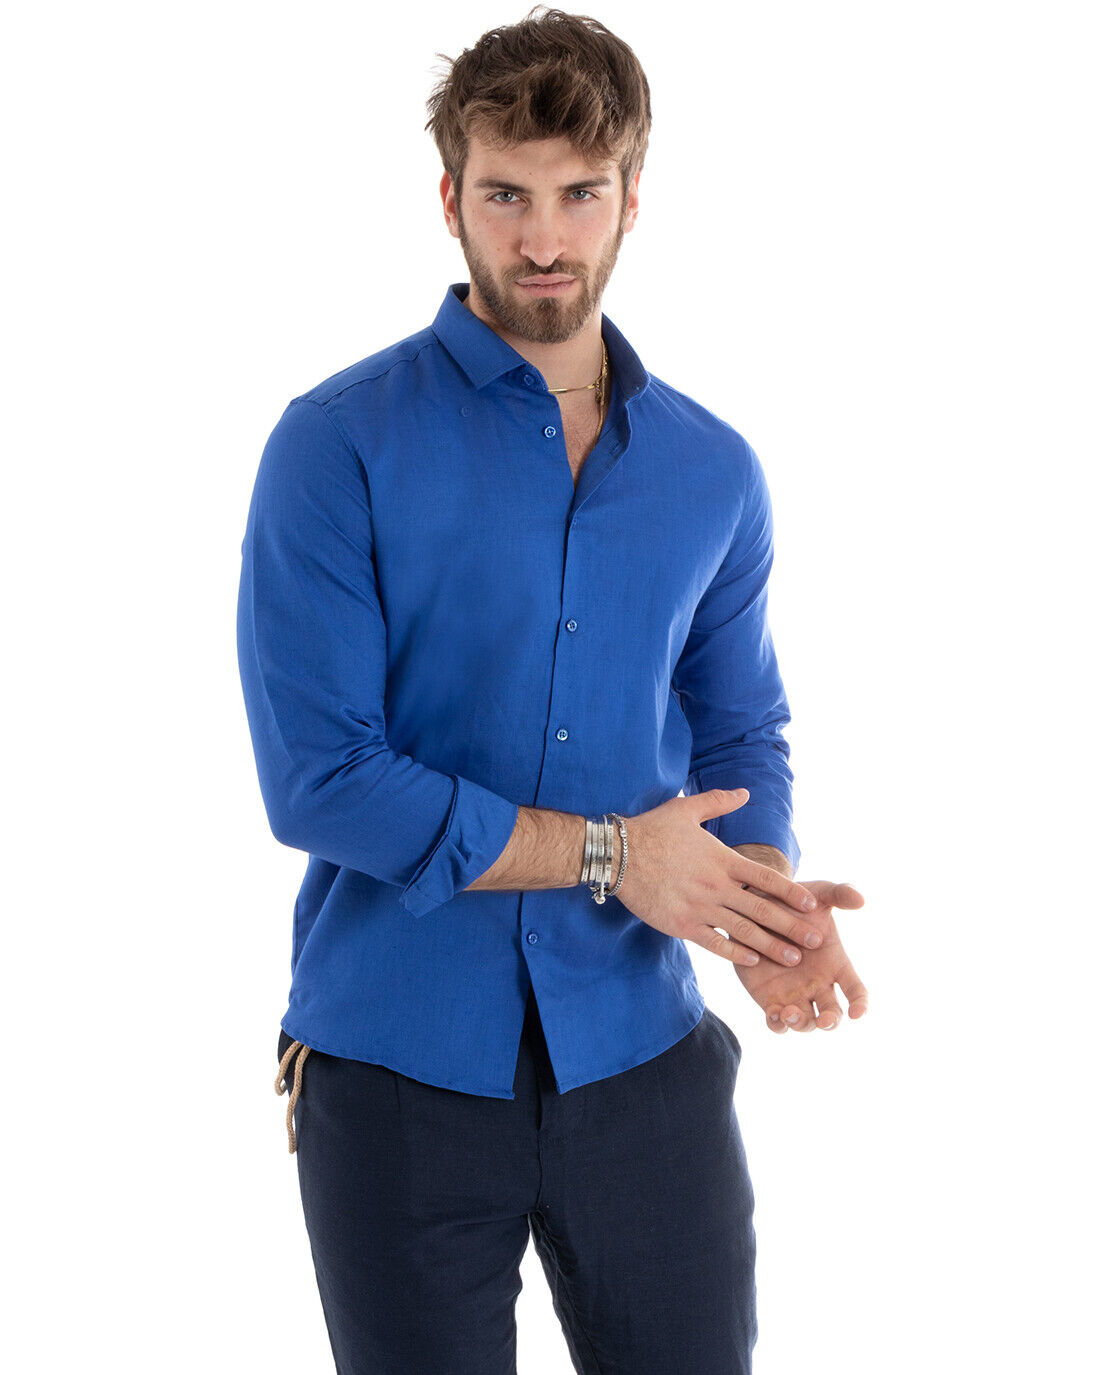 Men's Shirt With Collar Solid Color Royal Blue Linen Long Sleeve Casual Tailored GIOSAL-C2717A